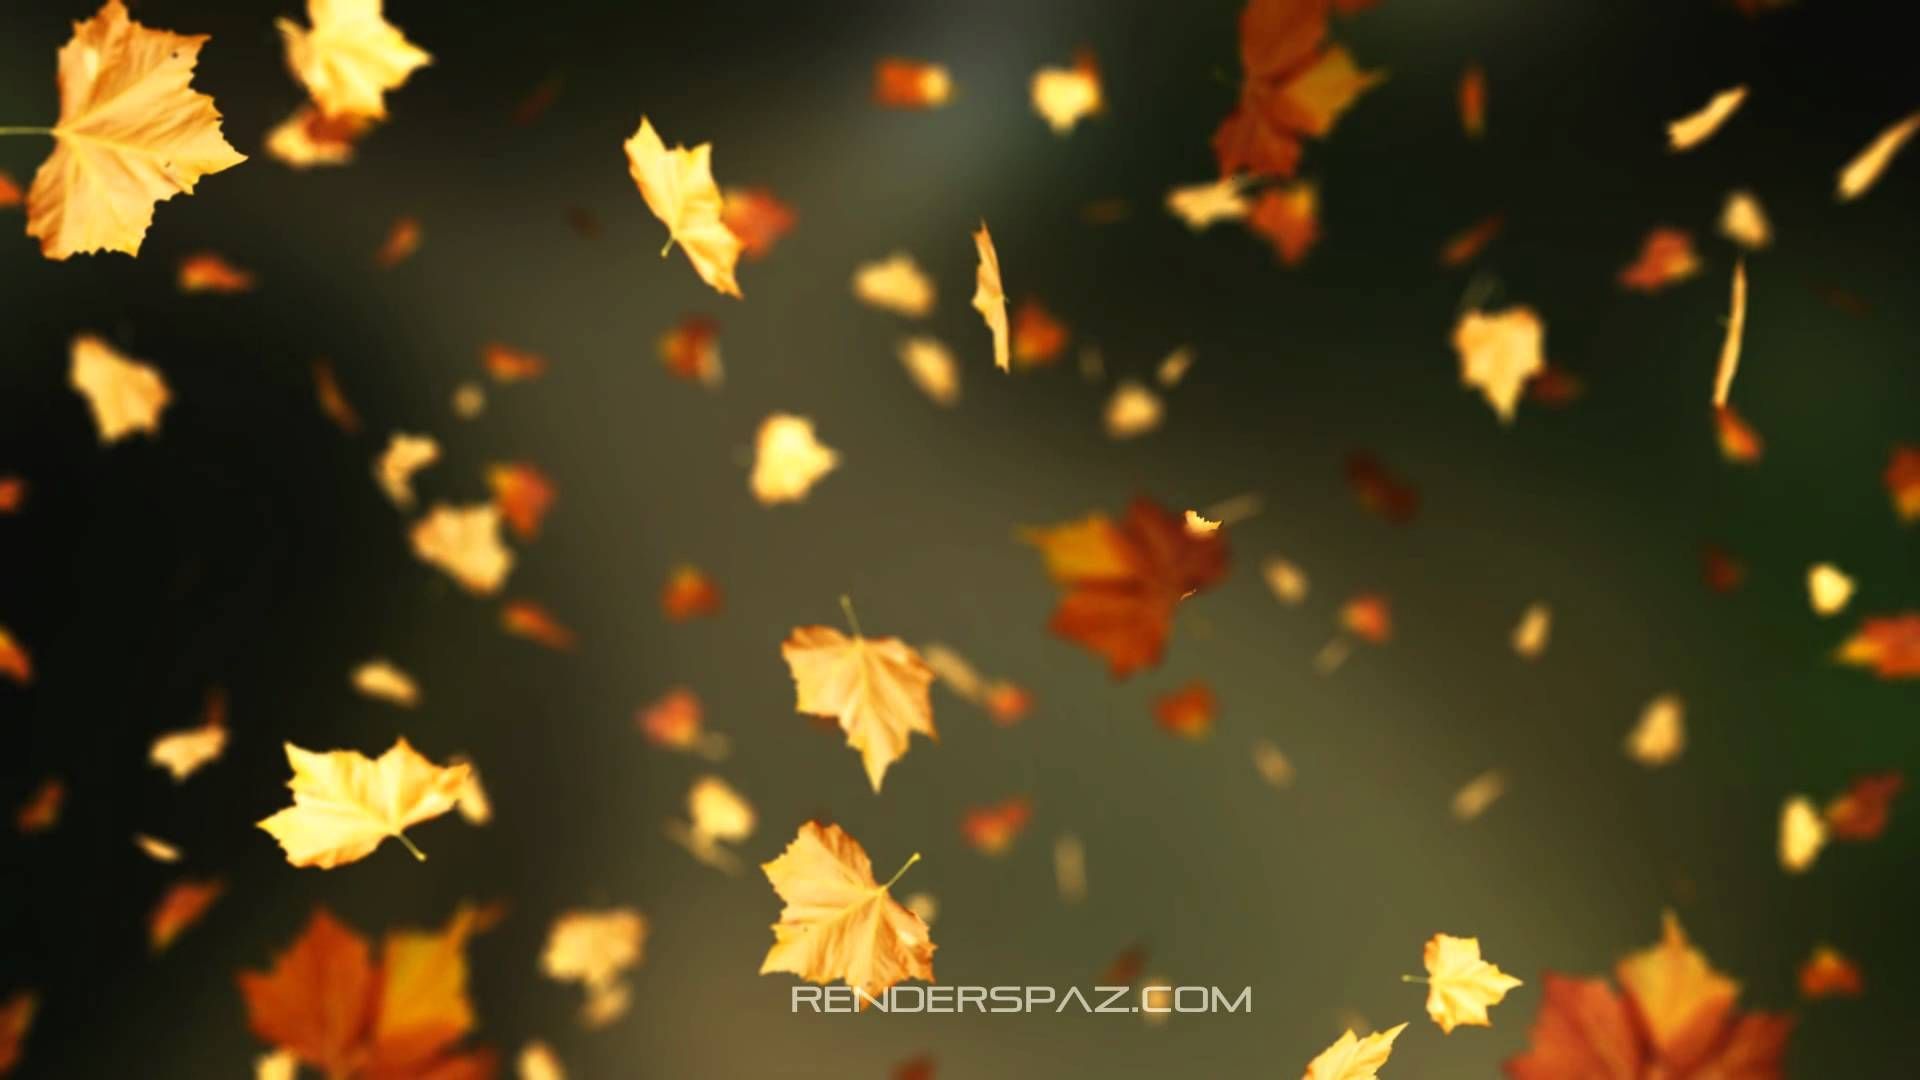 Fall Leaves Animated Wallpaper. Autumn leaves background, Fall wallpaper, Leaf background